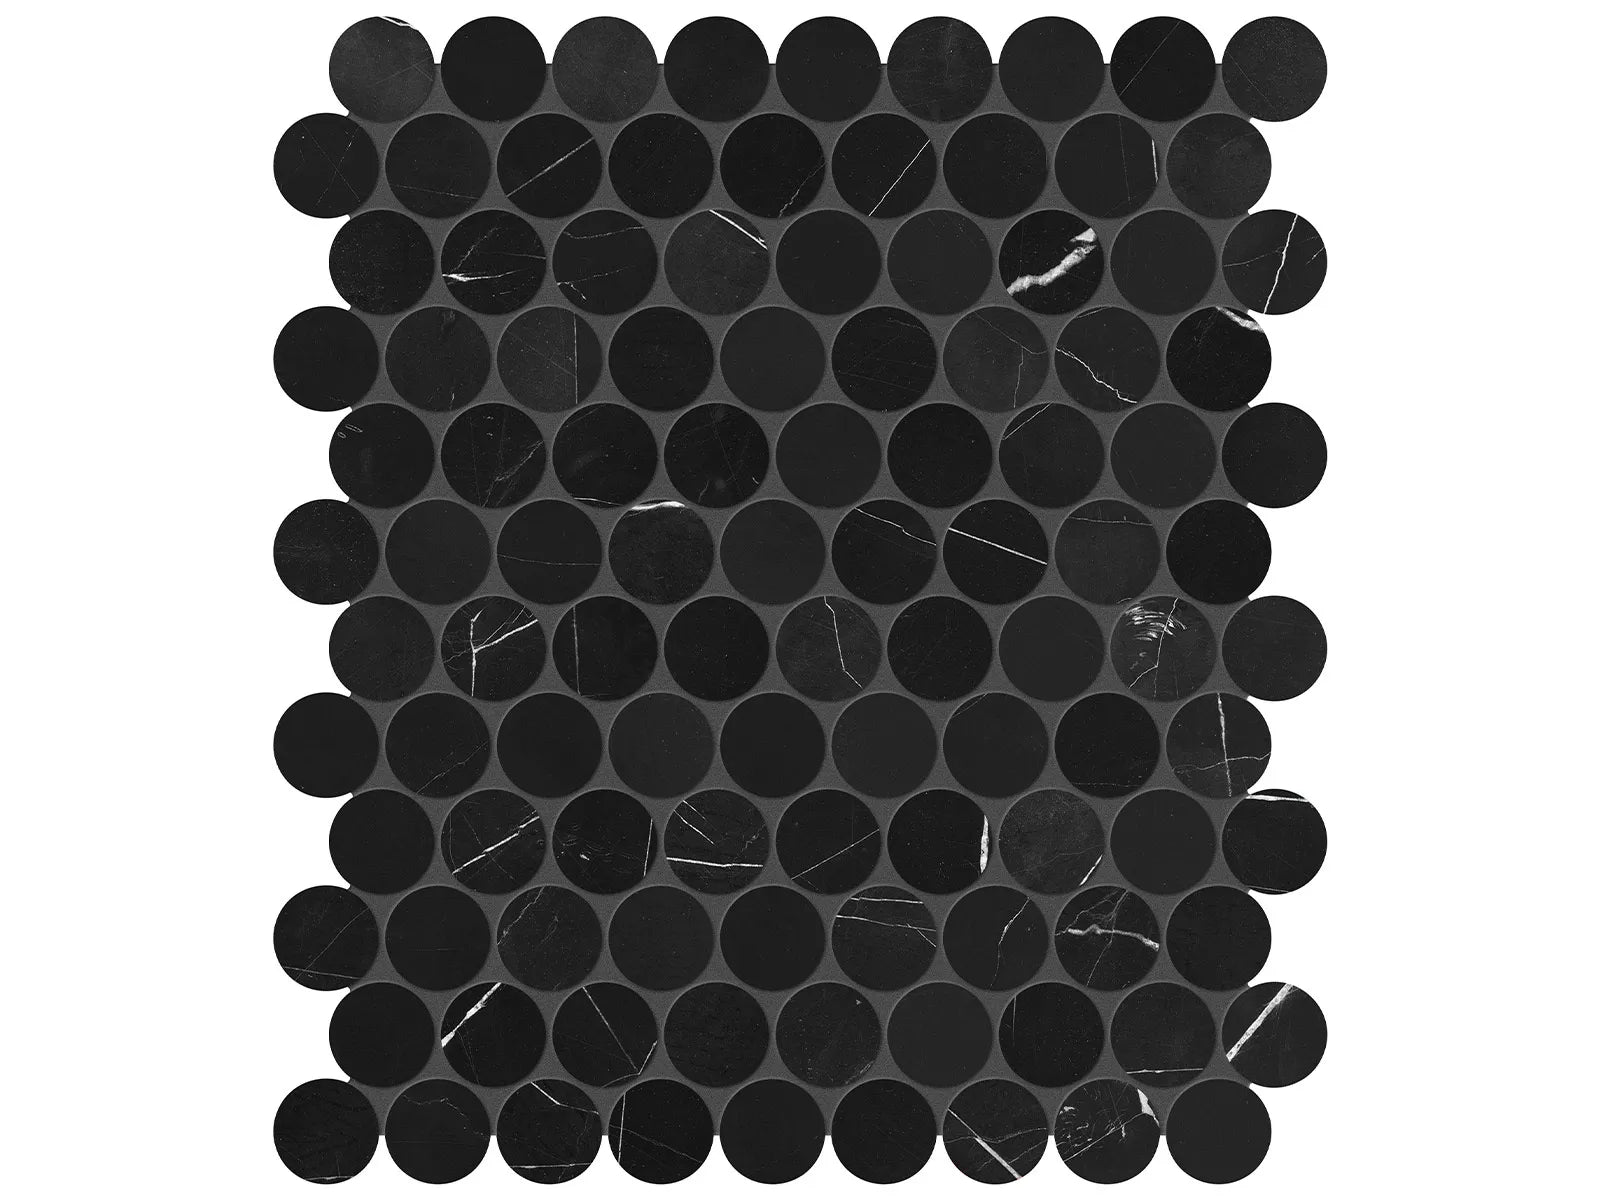 GALAXIA NERO: Marble Mosaic 1 1/4 Penny Rounds (12⅞"X11⅛"X⅜" | Polished)